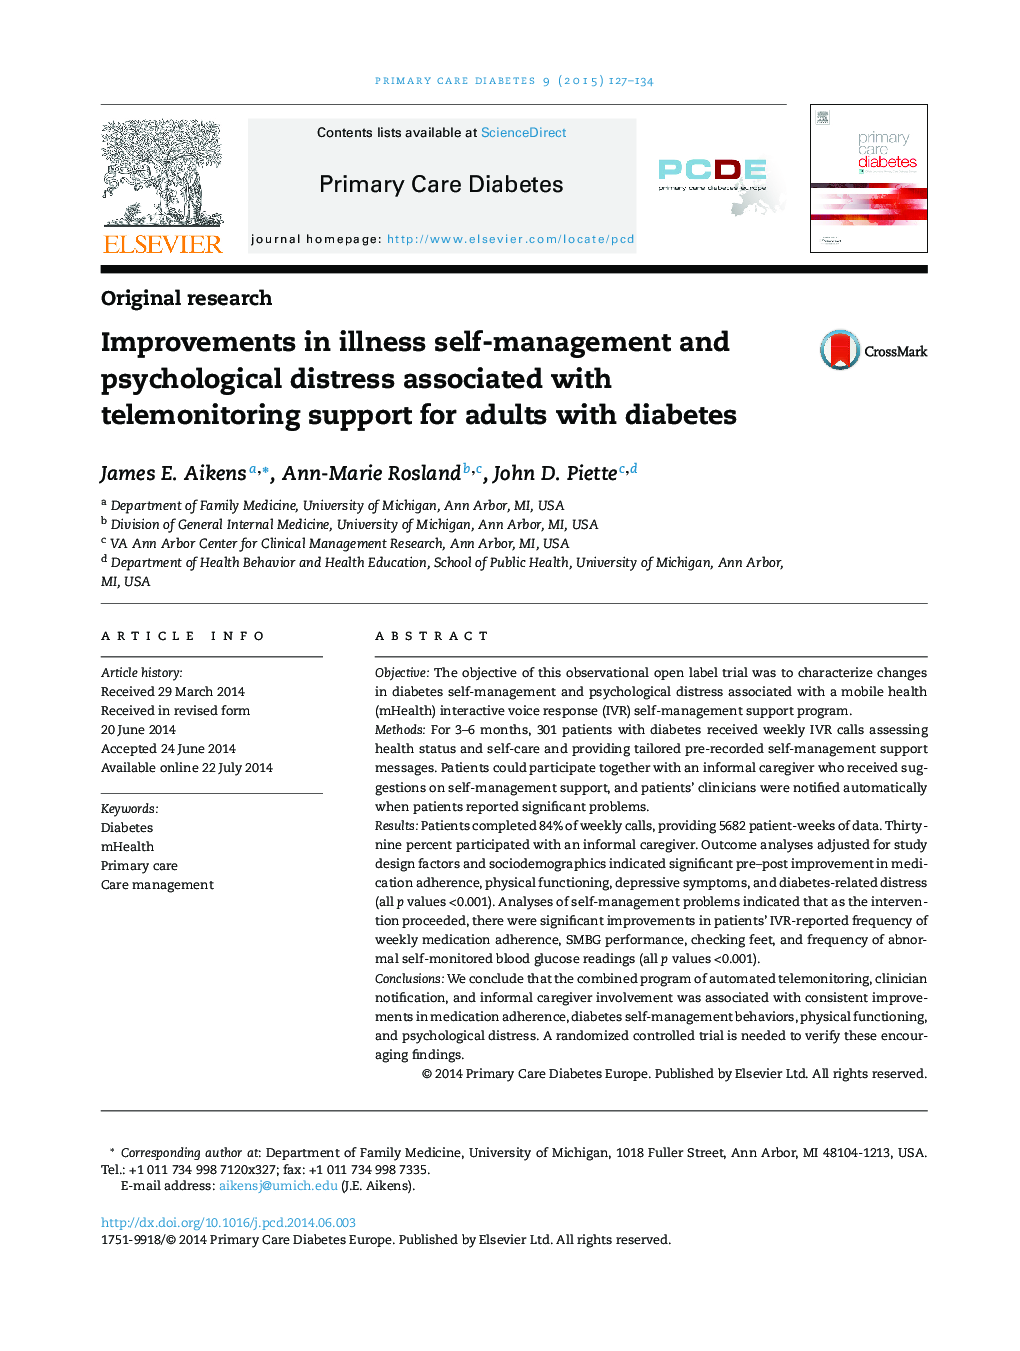 Improvements in illness self-management and psychological distress associated with telemonitoring support for adults with diabetes